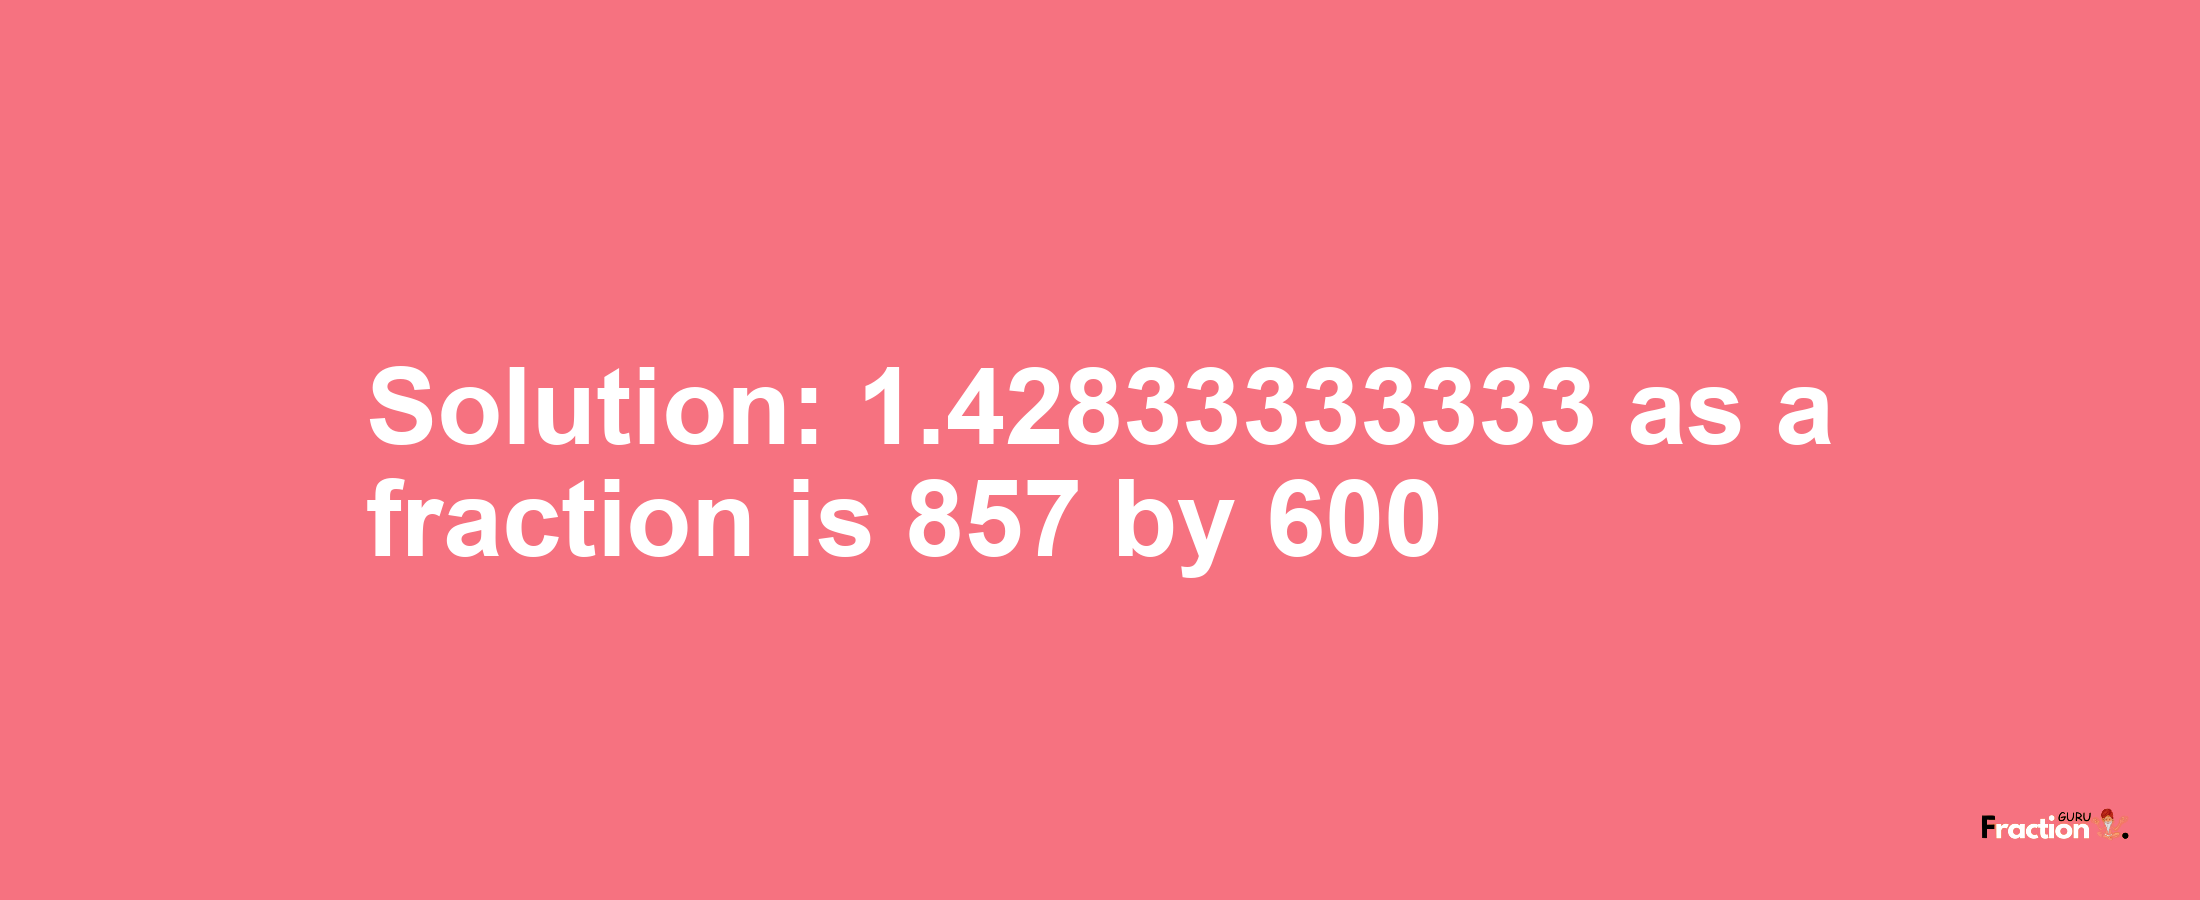 Solution:1.42833333333 as a fraction is 857/600